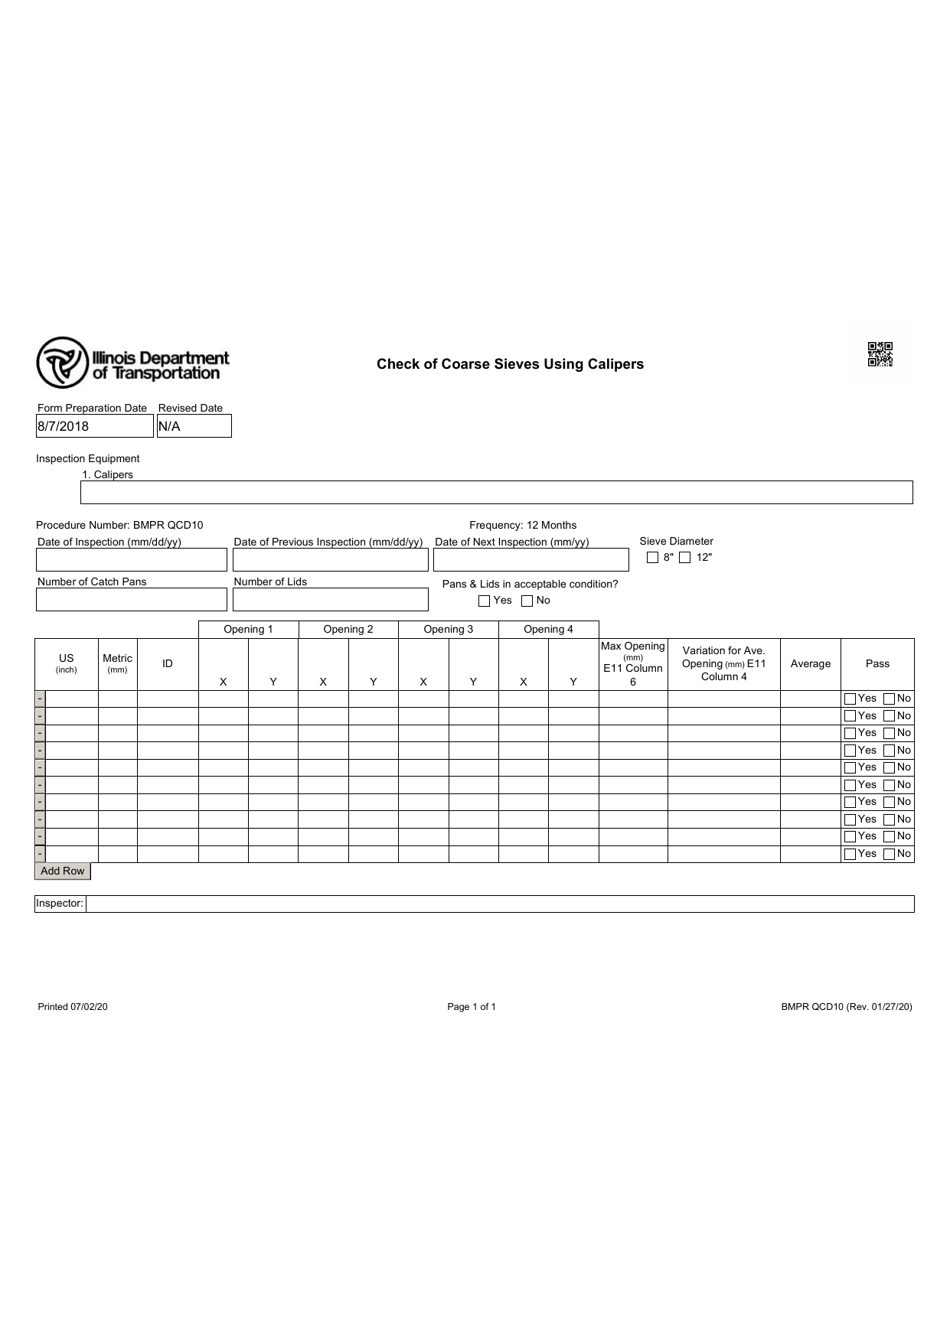 Form BMPR QCD10 Check of Coarse Sieves Using Calipers - Illinois, Page 1